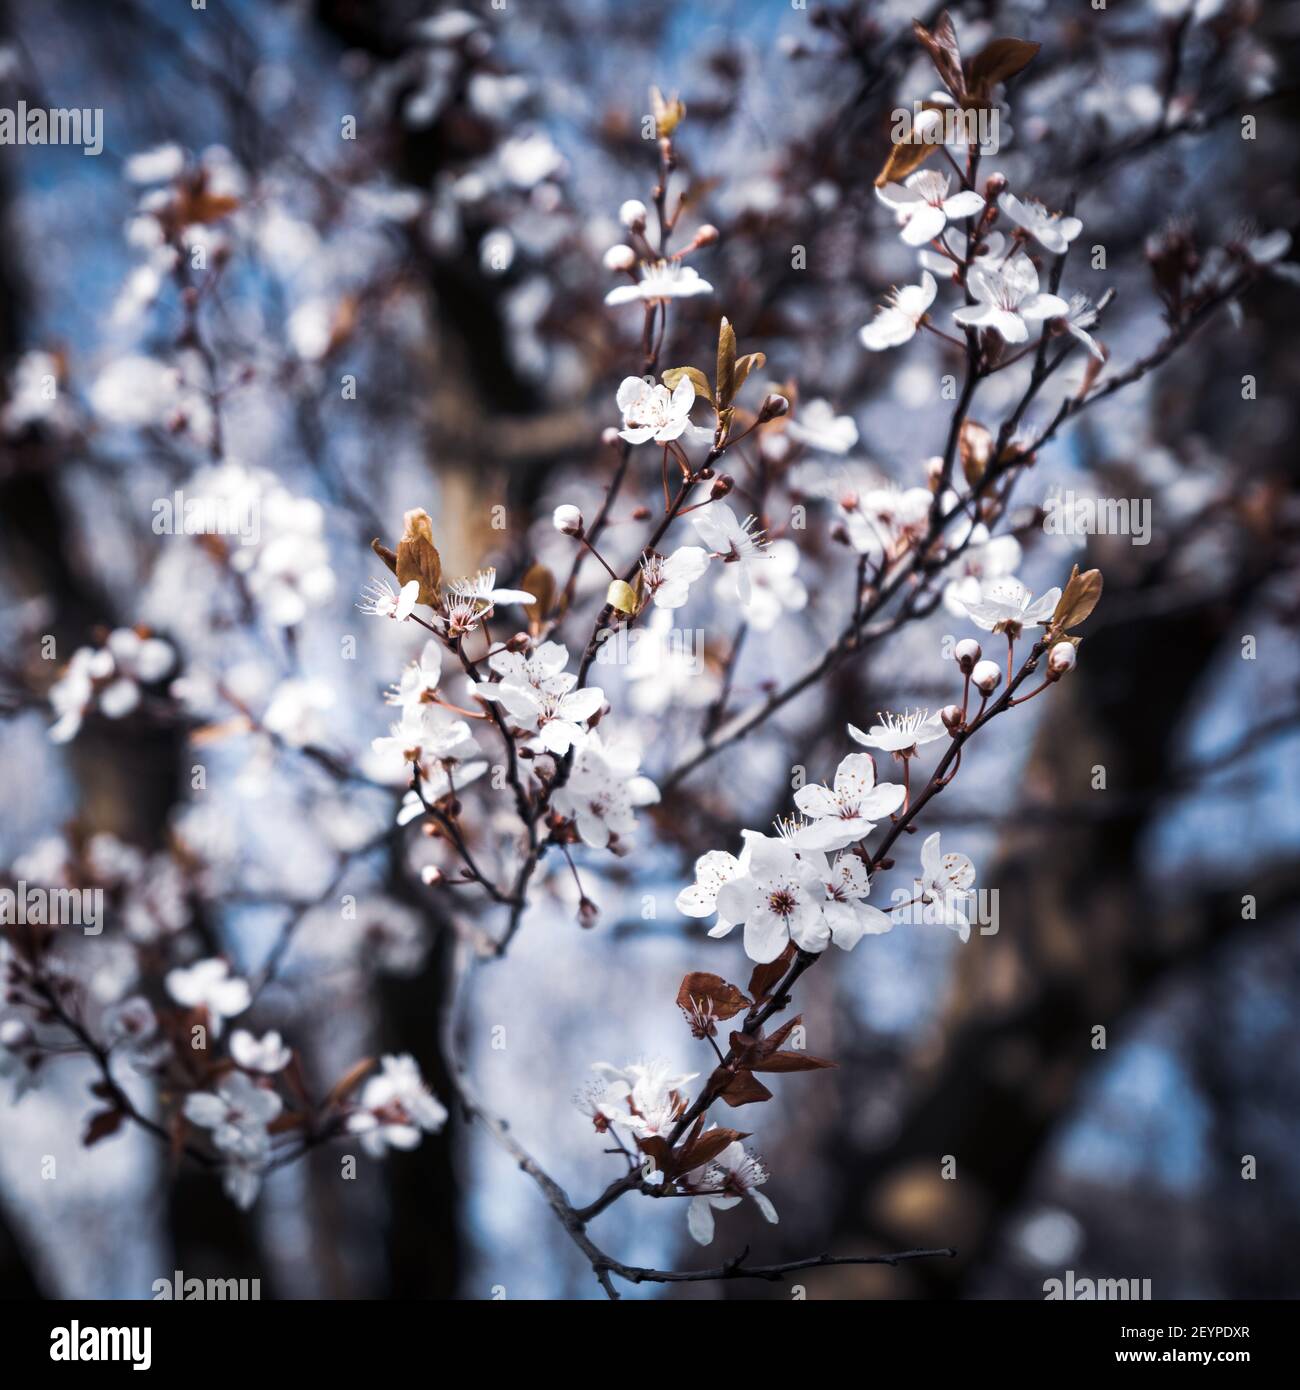 Cherry blossom flowers on a tree bloom into life Stock Photo